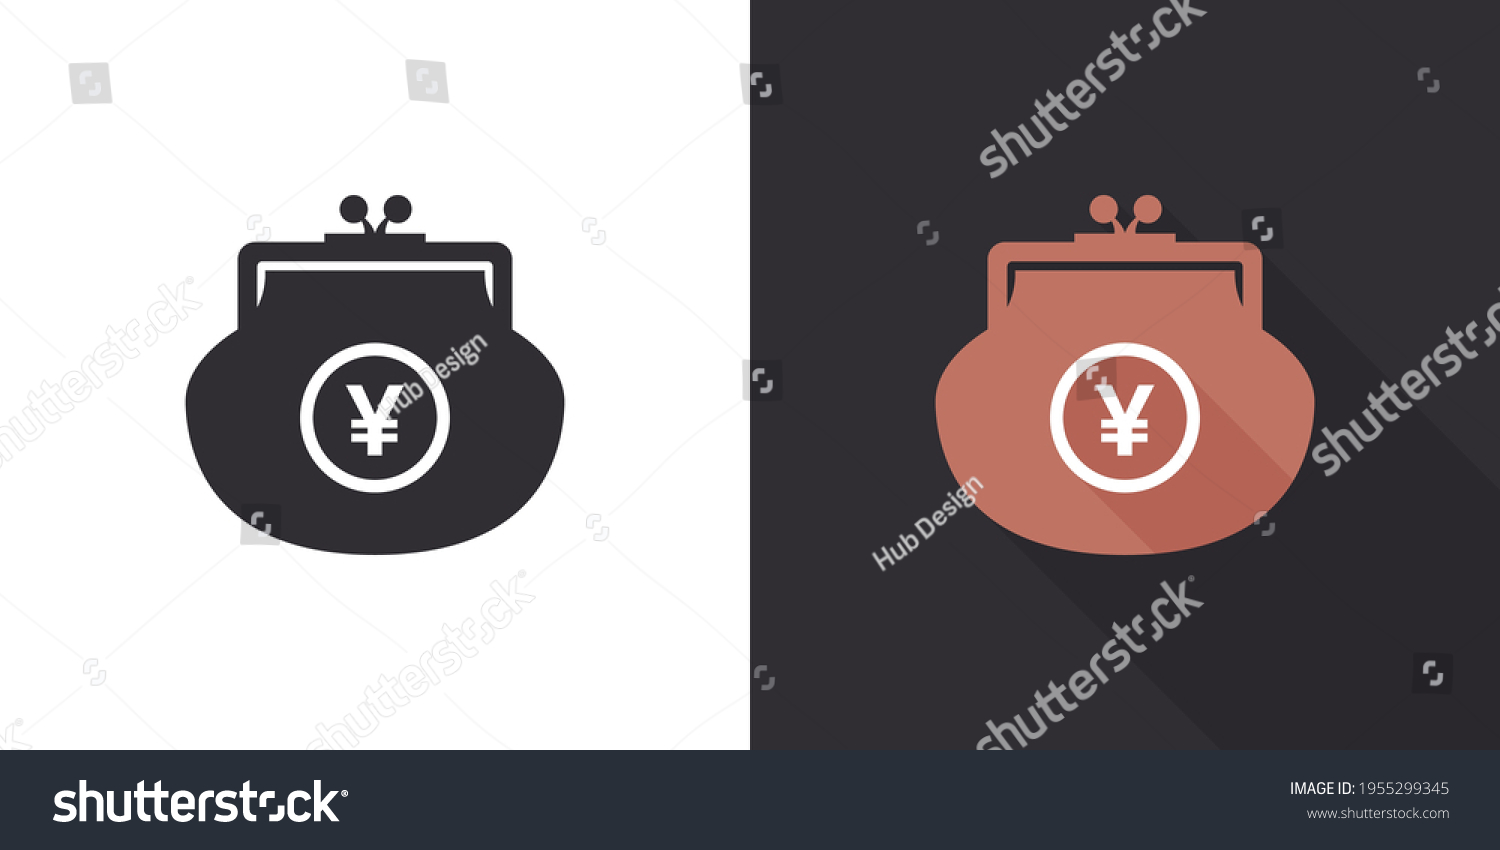 SVG of Yen wallet icon. Purse icon. Wallet icon design template. Vector illustration svg